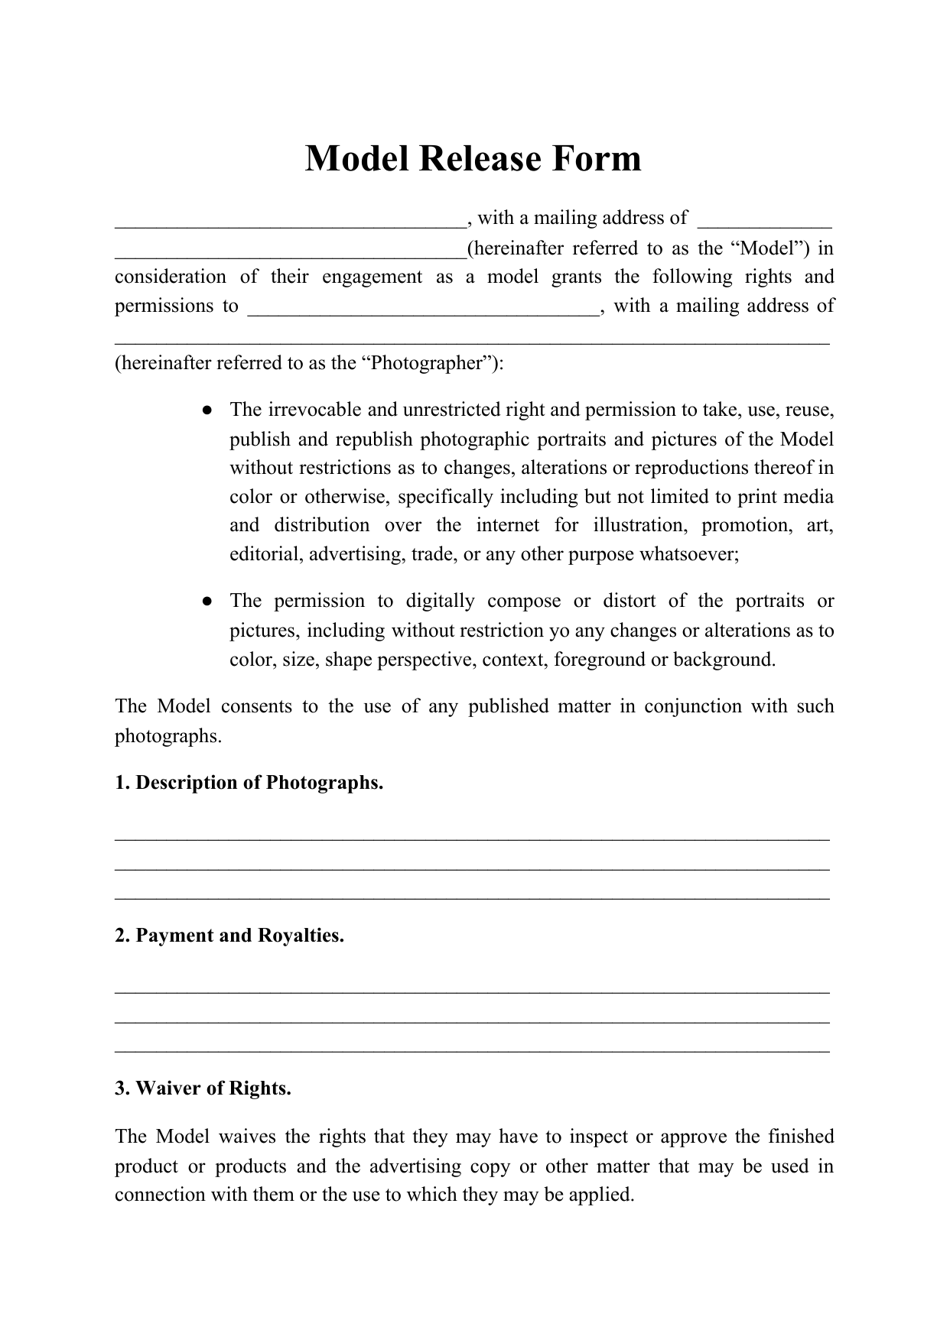 Model Release Form, Page 1